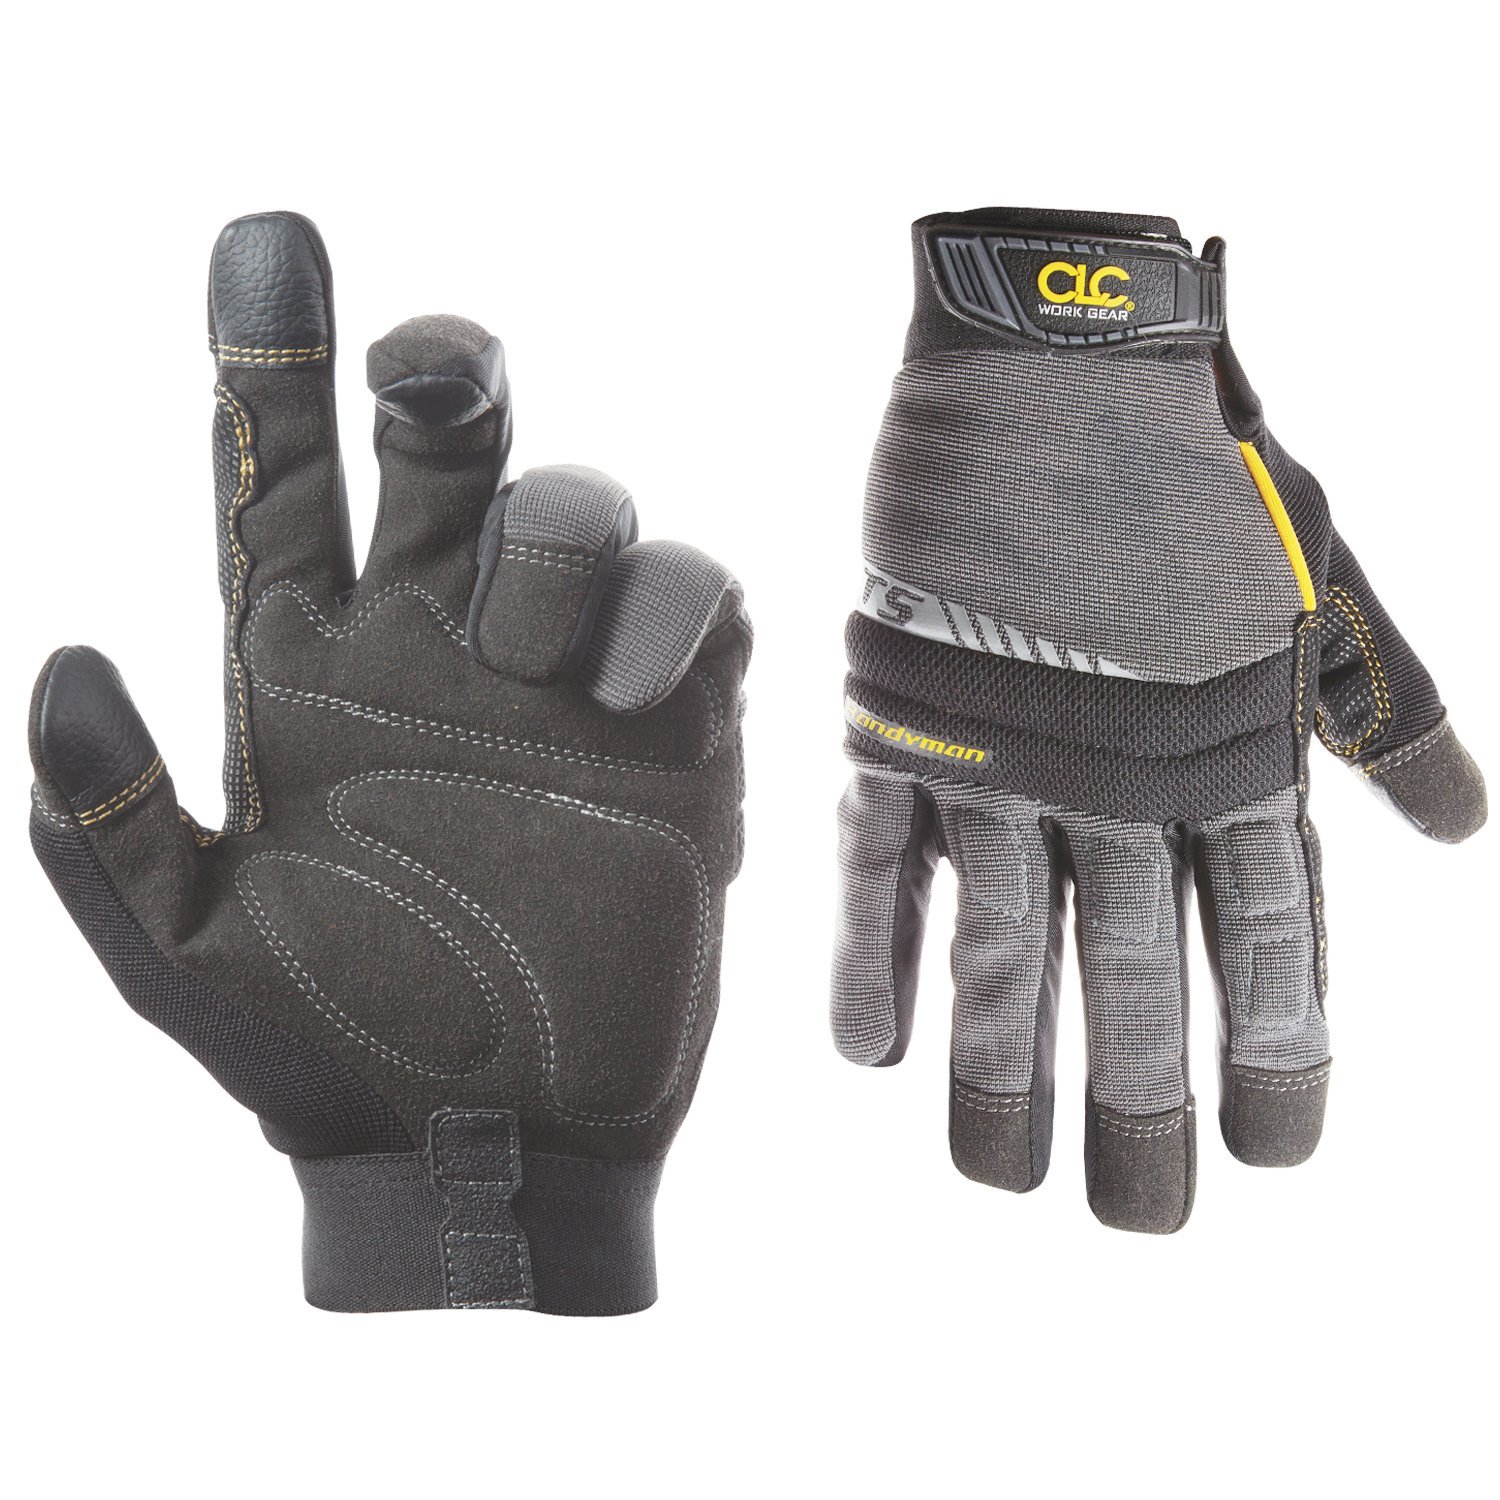 Flex Grip Work Gloves -a fabulous gift for men he'll really use and appreciate getting! These gloves with padded knuckles are perfect for yard work, auto mechanics and home improvement projects! 